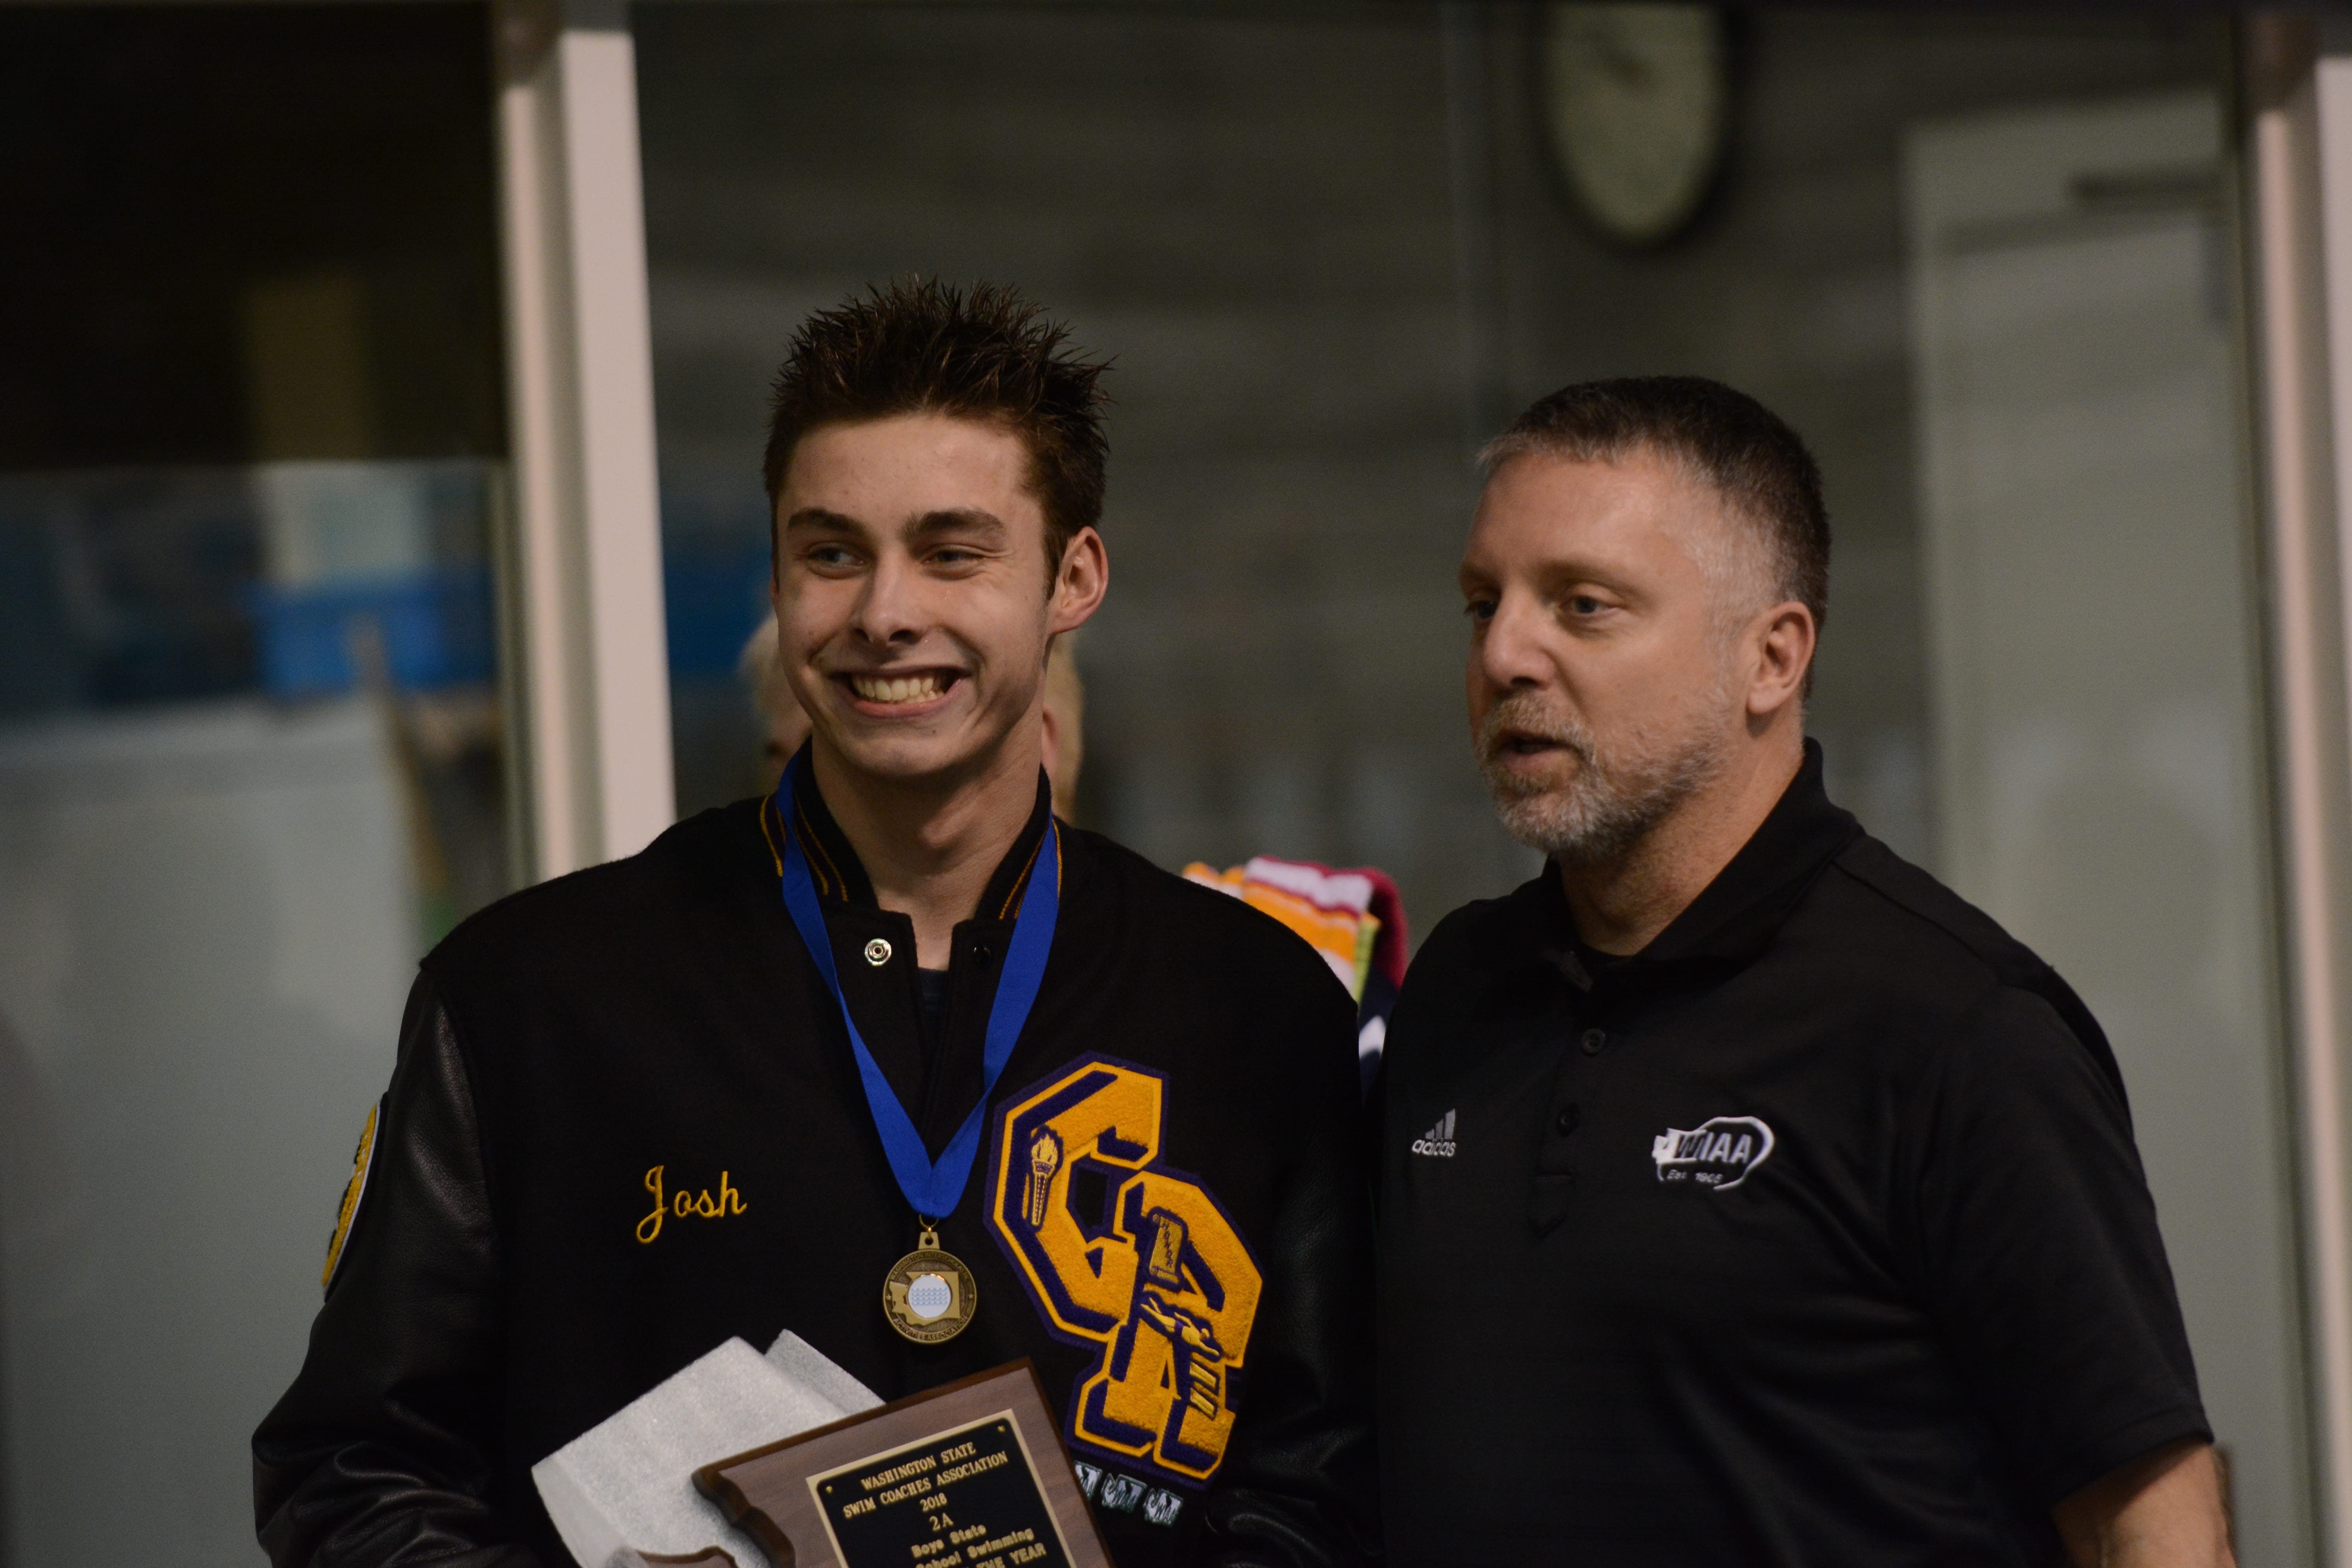 Josh Bottelberghe wins 2A swimmer of the year at the 2A state swim meet in Federal Way's King County Aquatic Center on Saturday, Feb. 17, 2018.